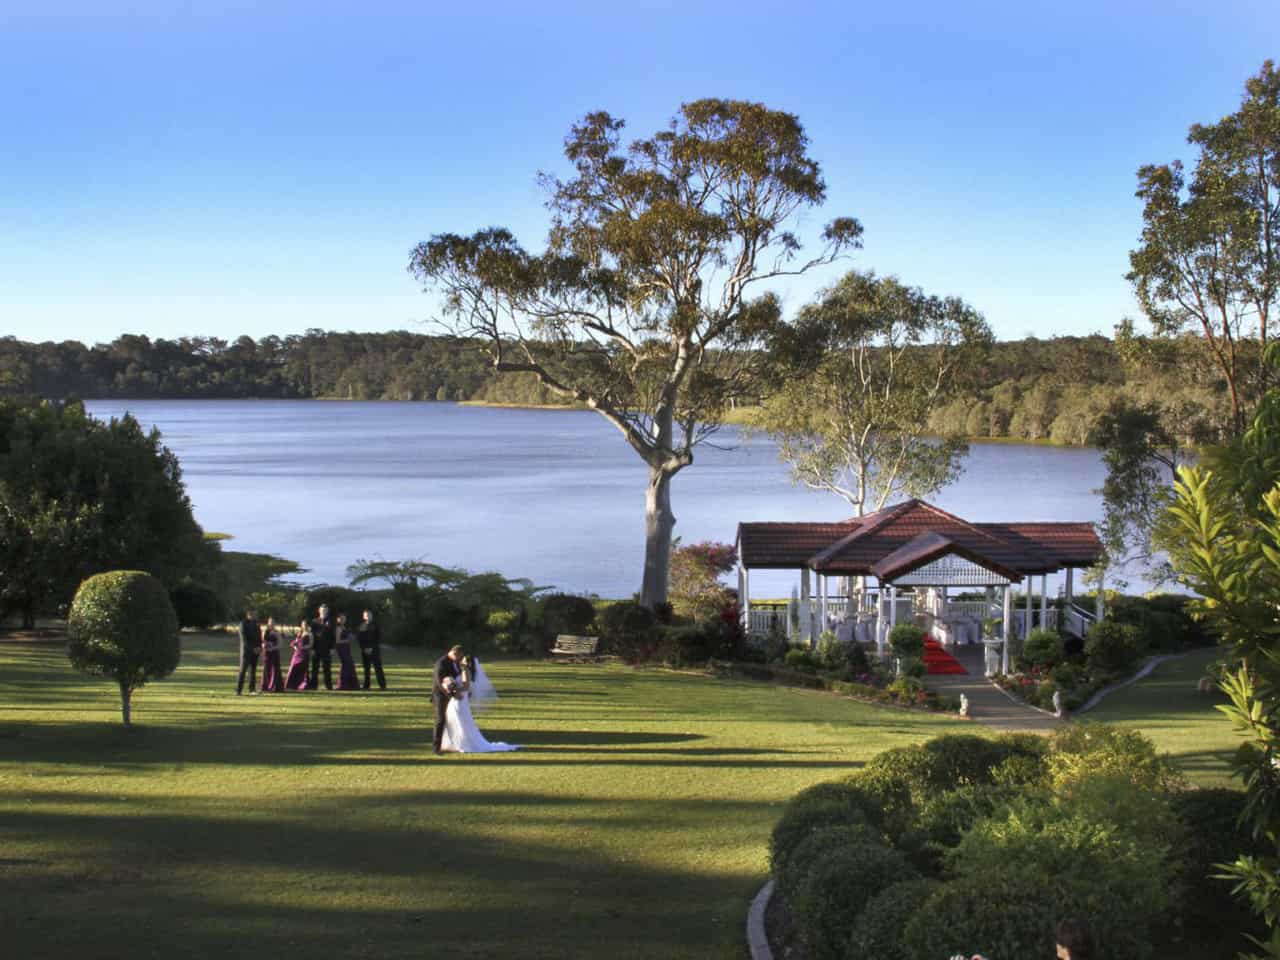 Lakeside wedding ceremony with bride and groom on lawn